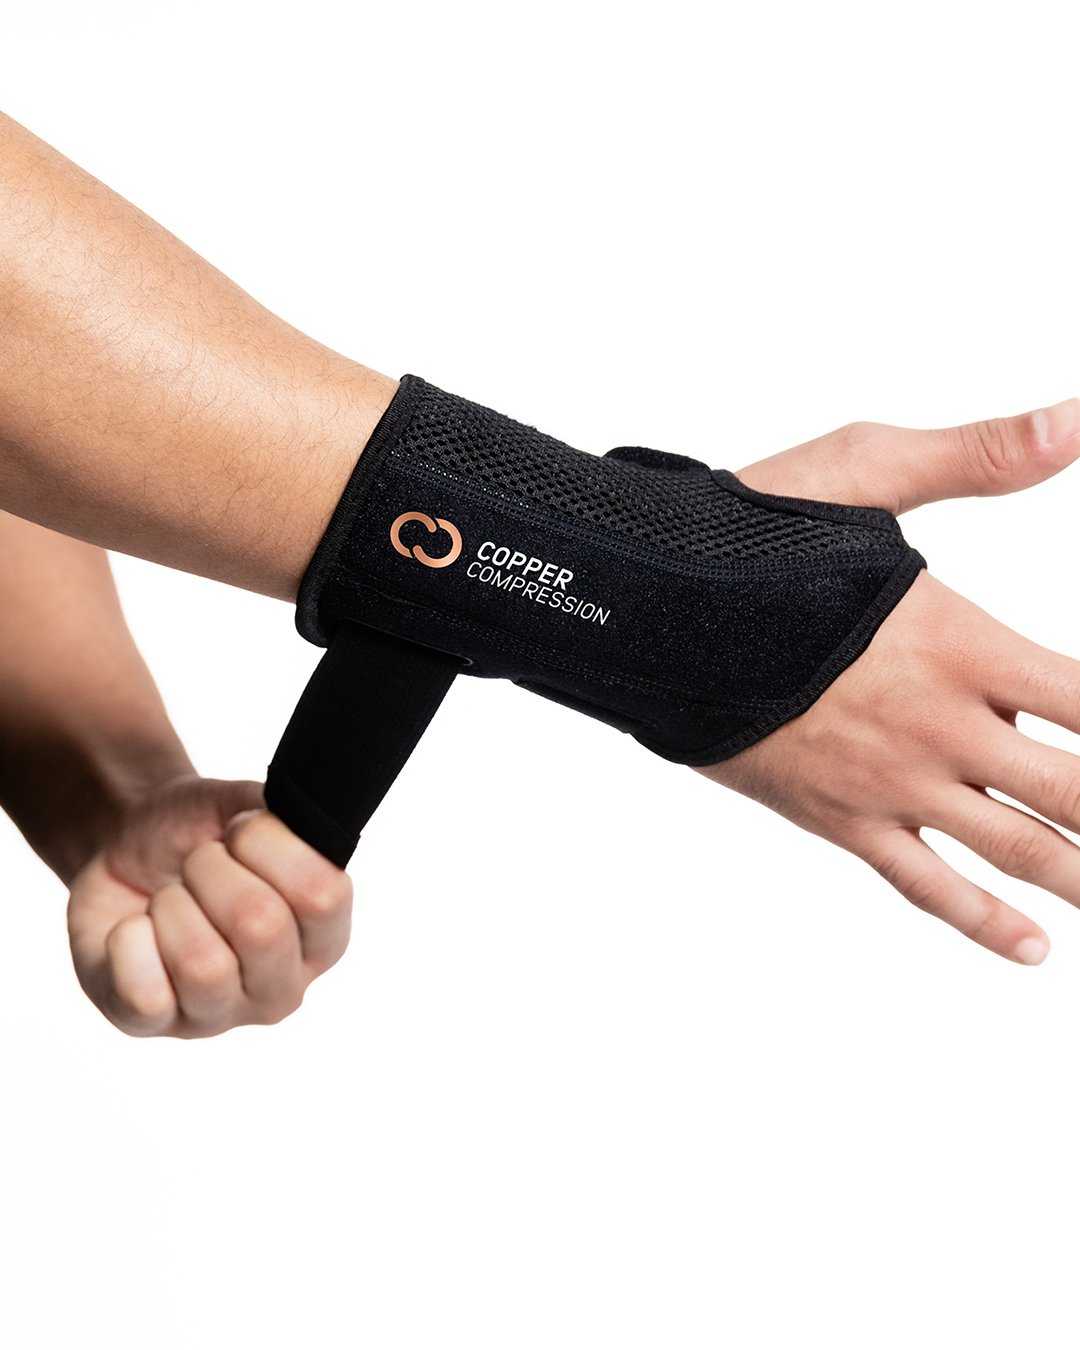 Review: Copper Compression Wrist Brace - Adjustable Orthopedic Support for  Pain Relief 